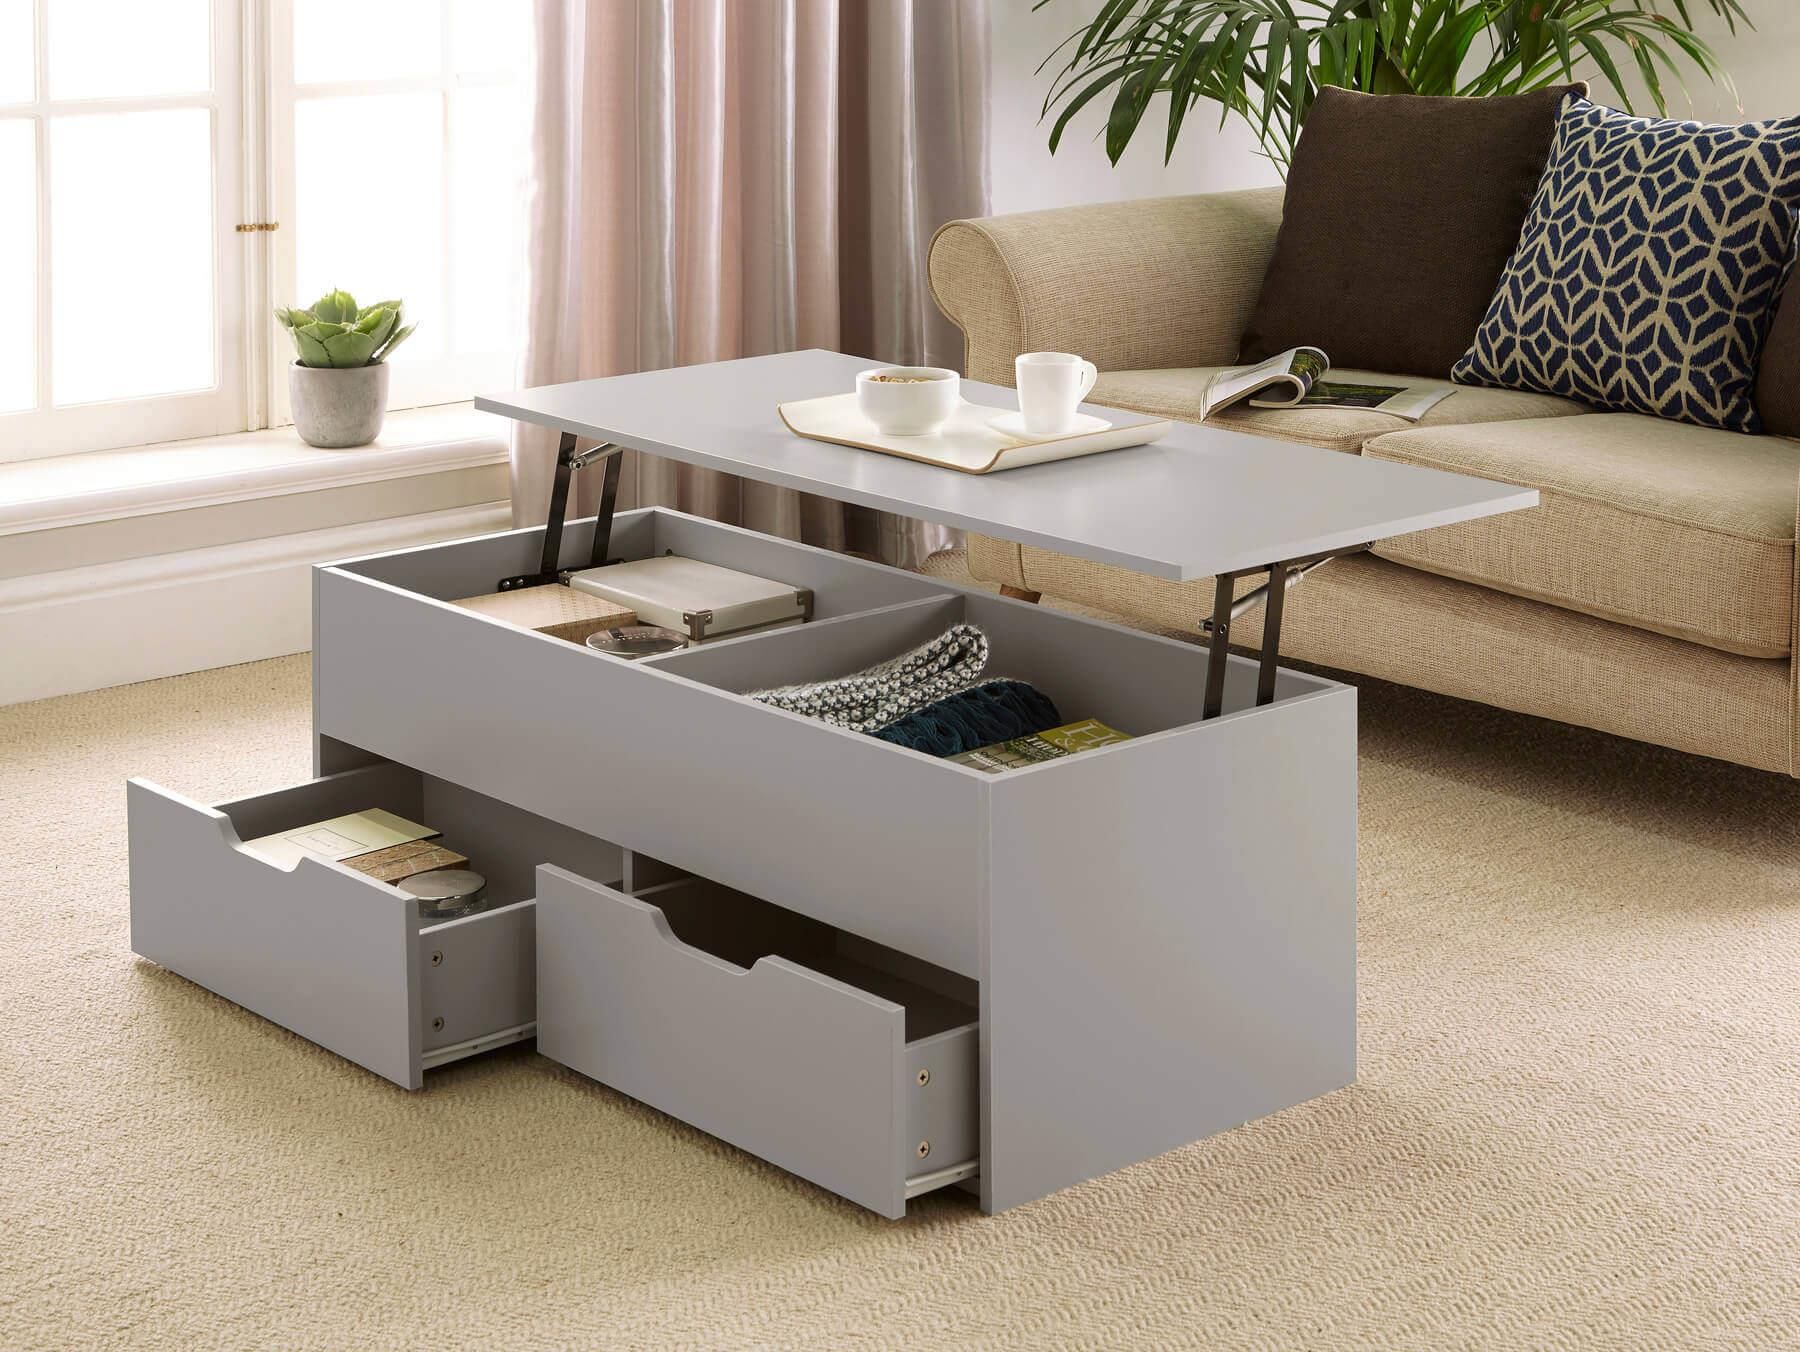 Grey Wooden Coffee Table With Lift Up Top And 2 Large Storage Drawers Pertaining To Lift Top Coffee Tables With Storage Drawers (Gallery 8 of 20)